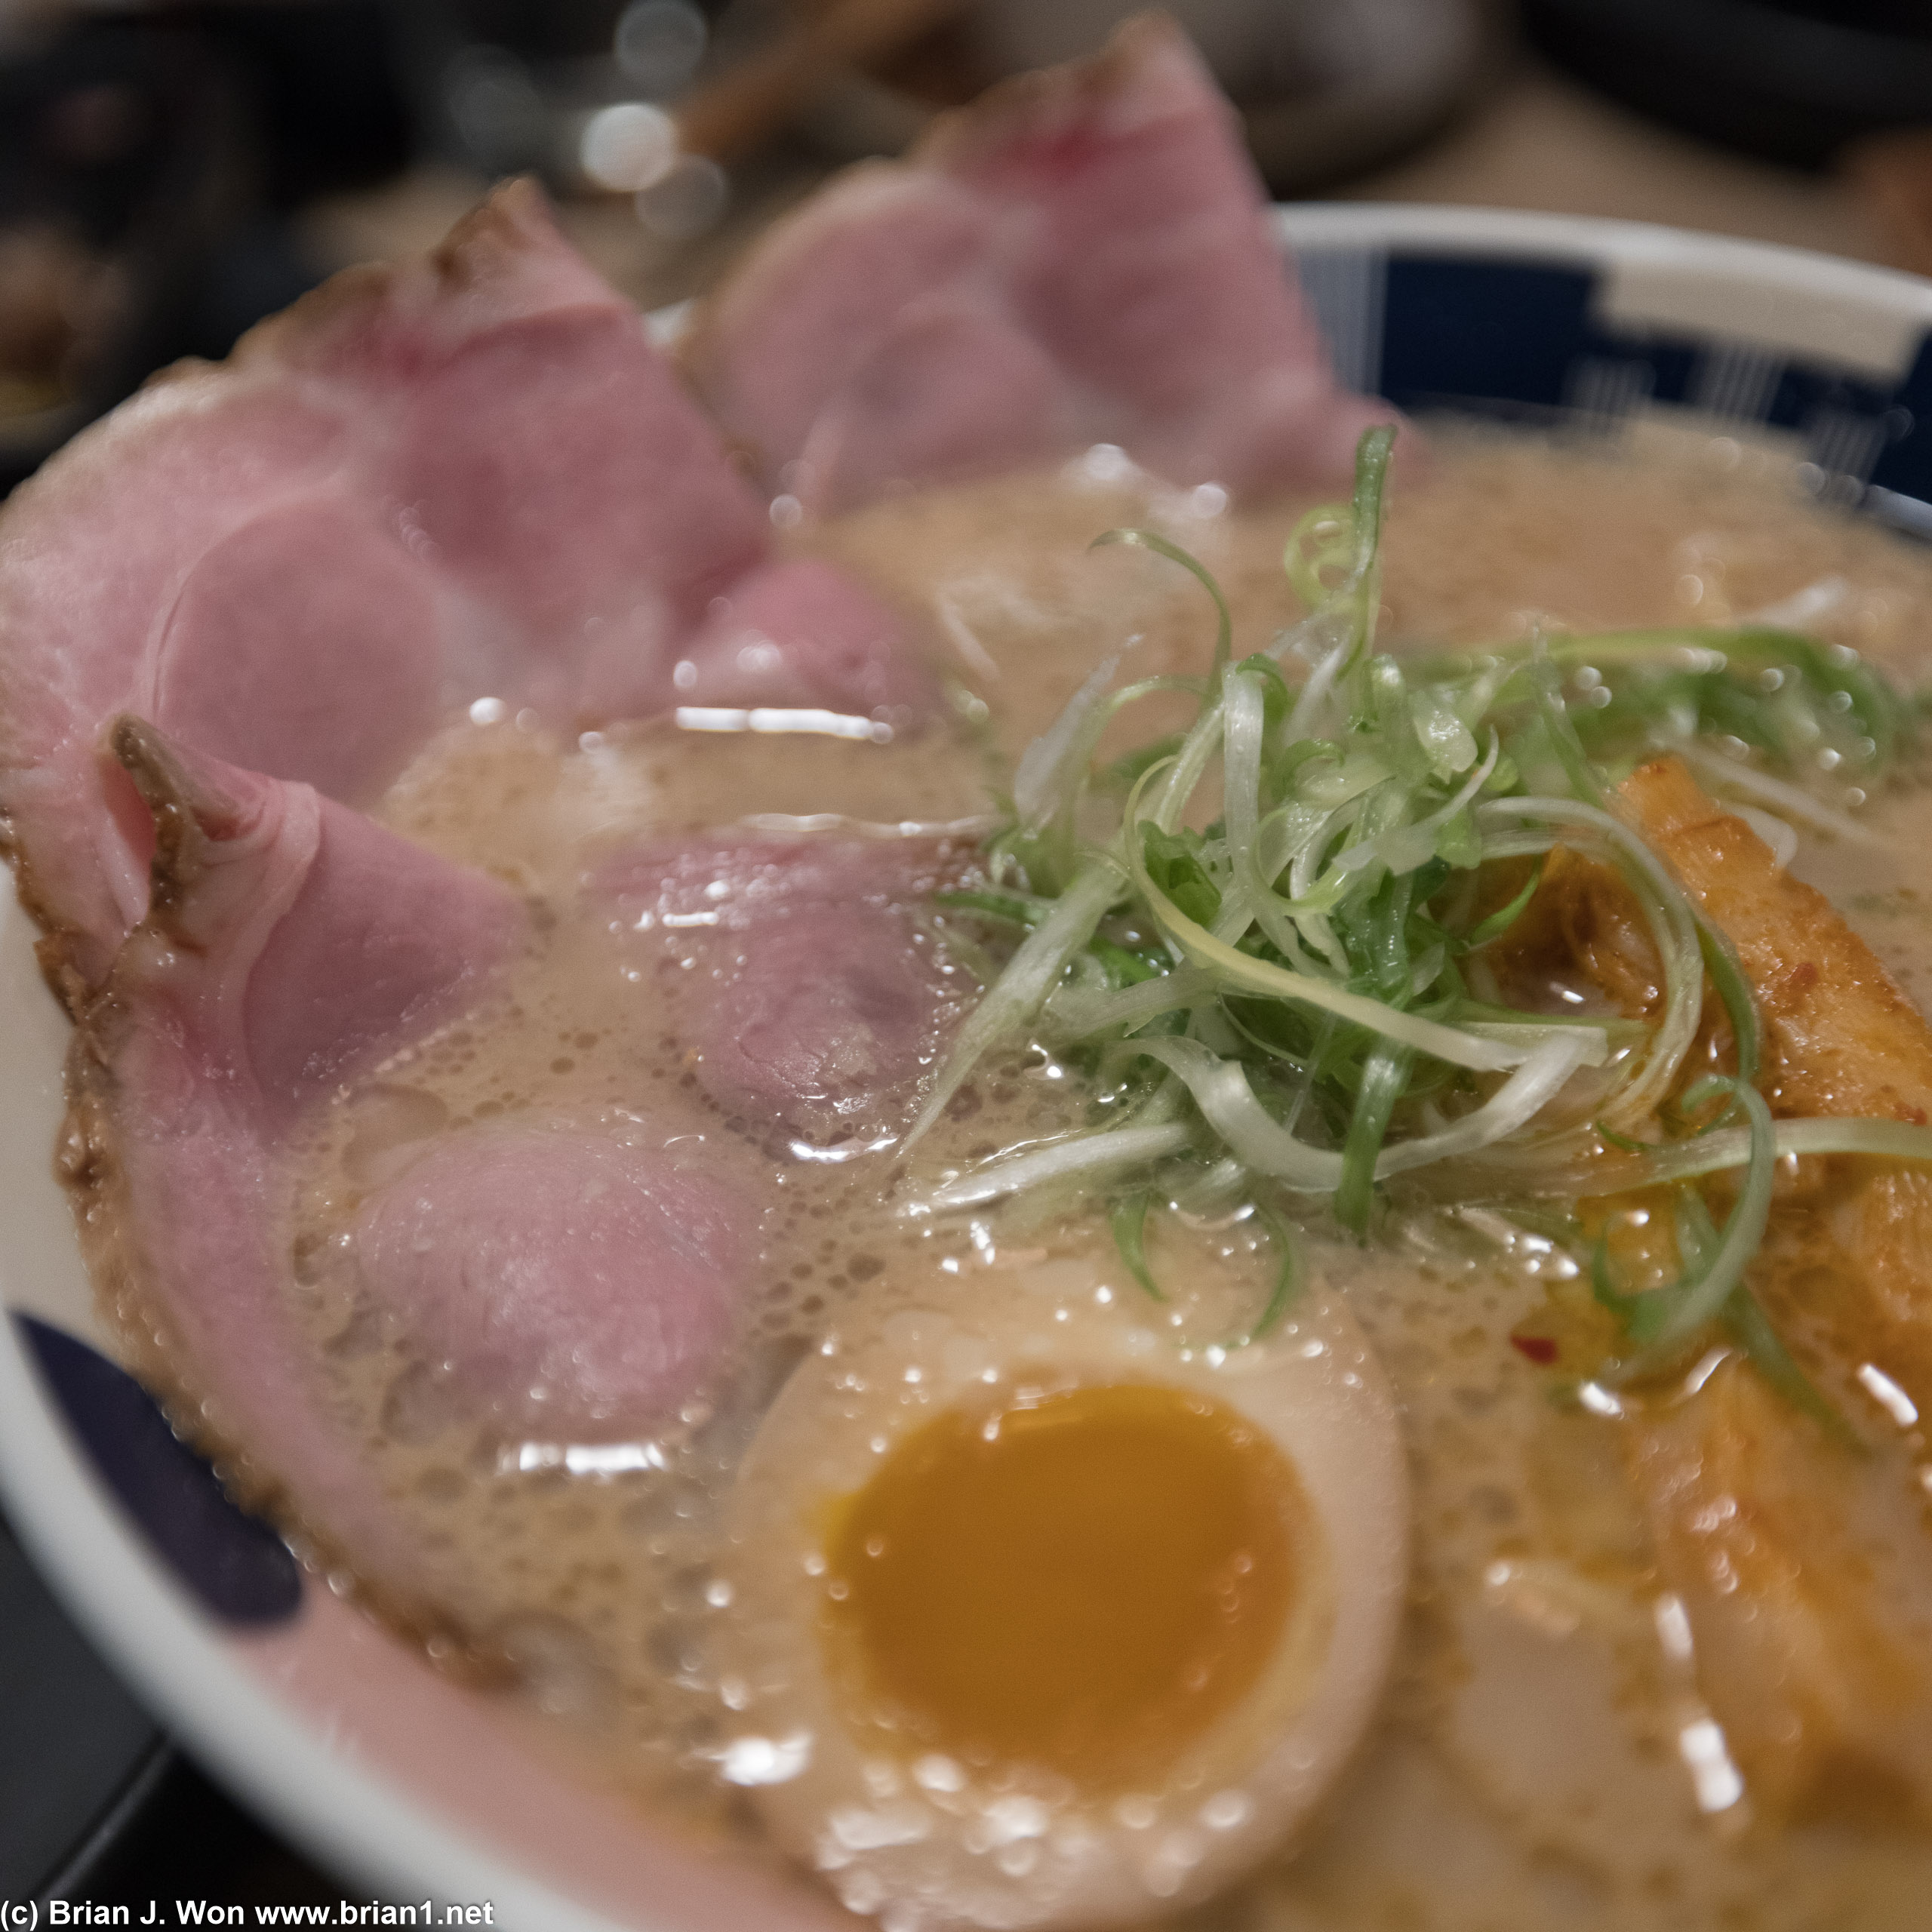 Another shot of the ramen, especially the char shu.